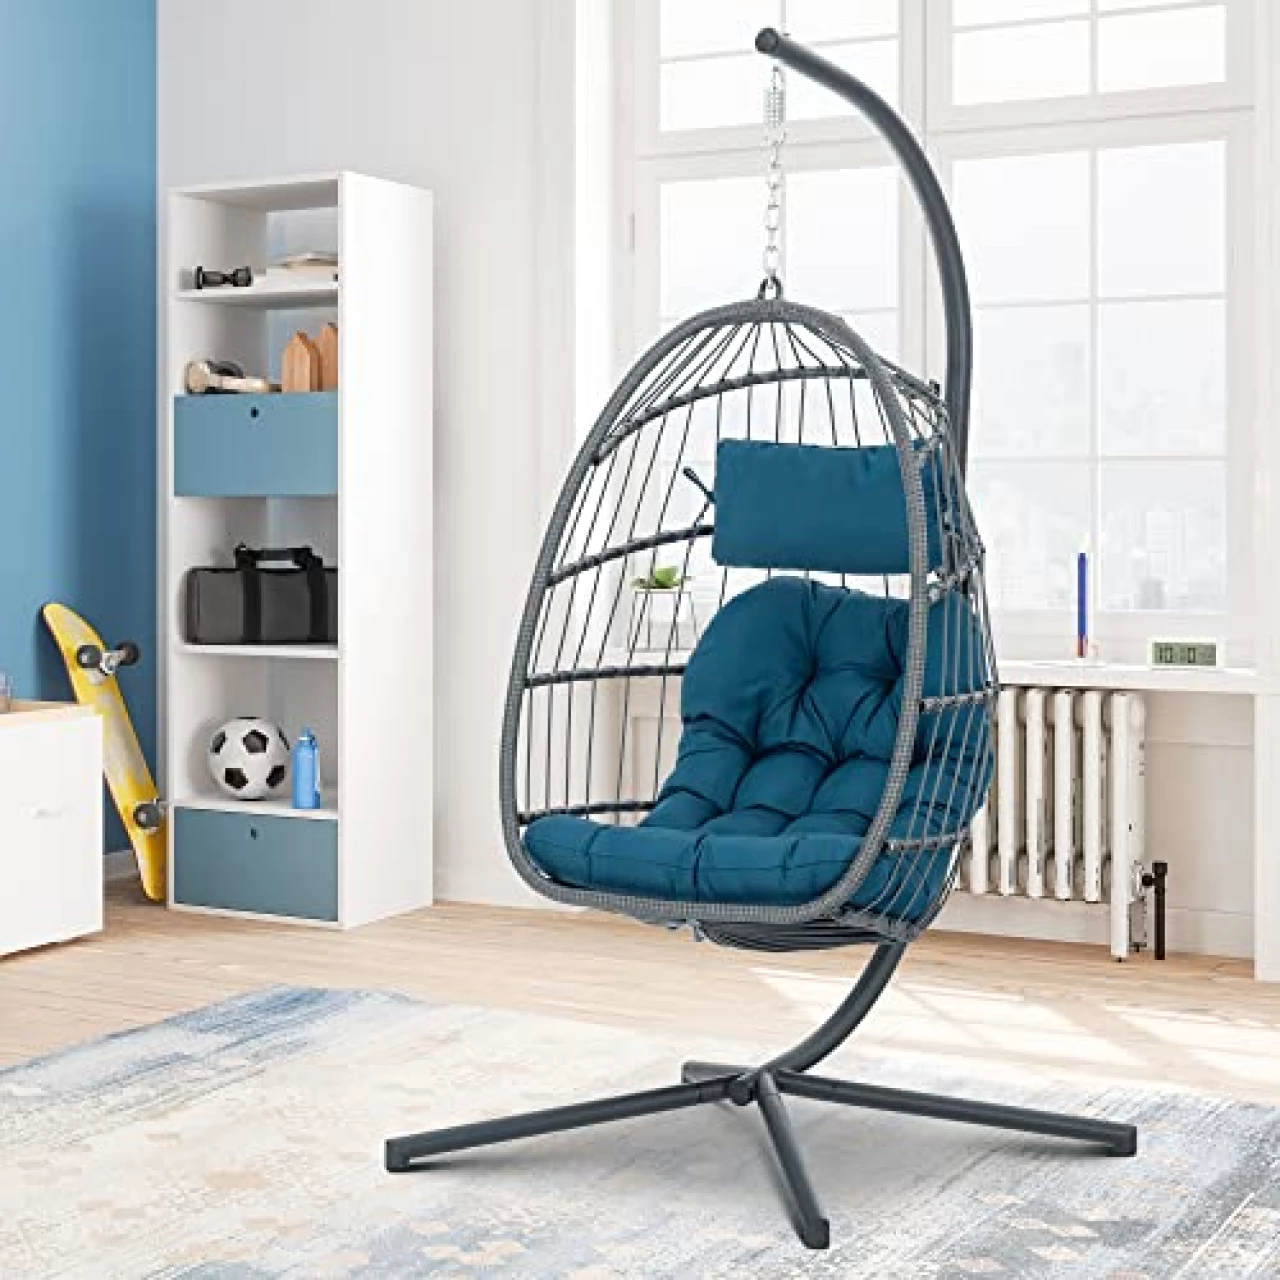 Brafab Wicker Rattan Hanging Swing Egg Chair, Aluminum Frame and UV Resistant Cushion